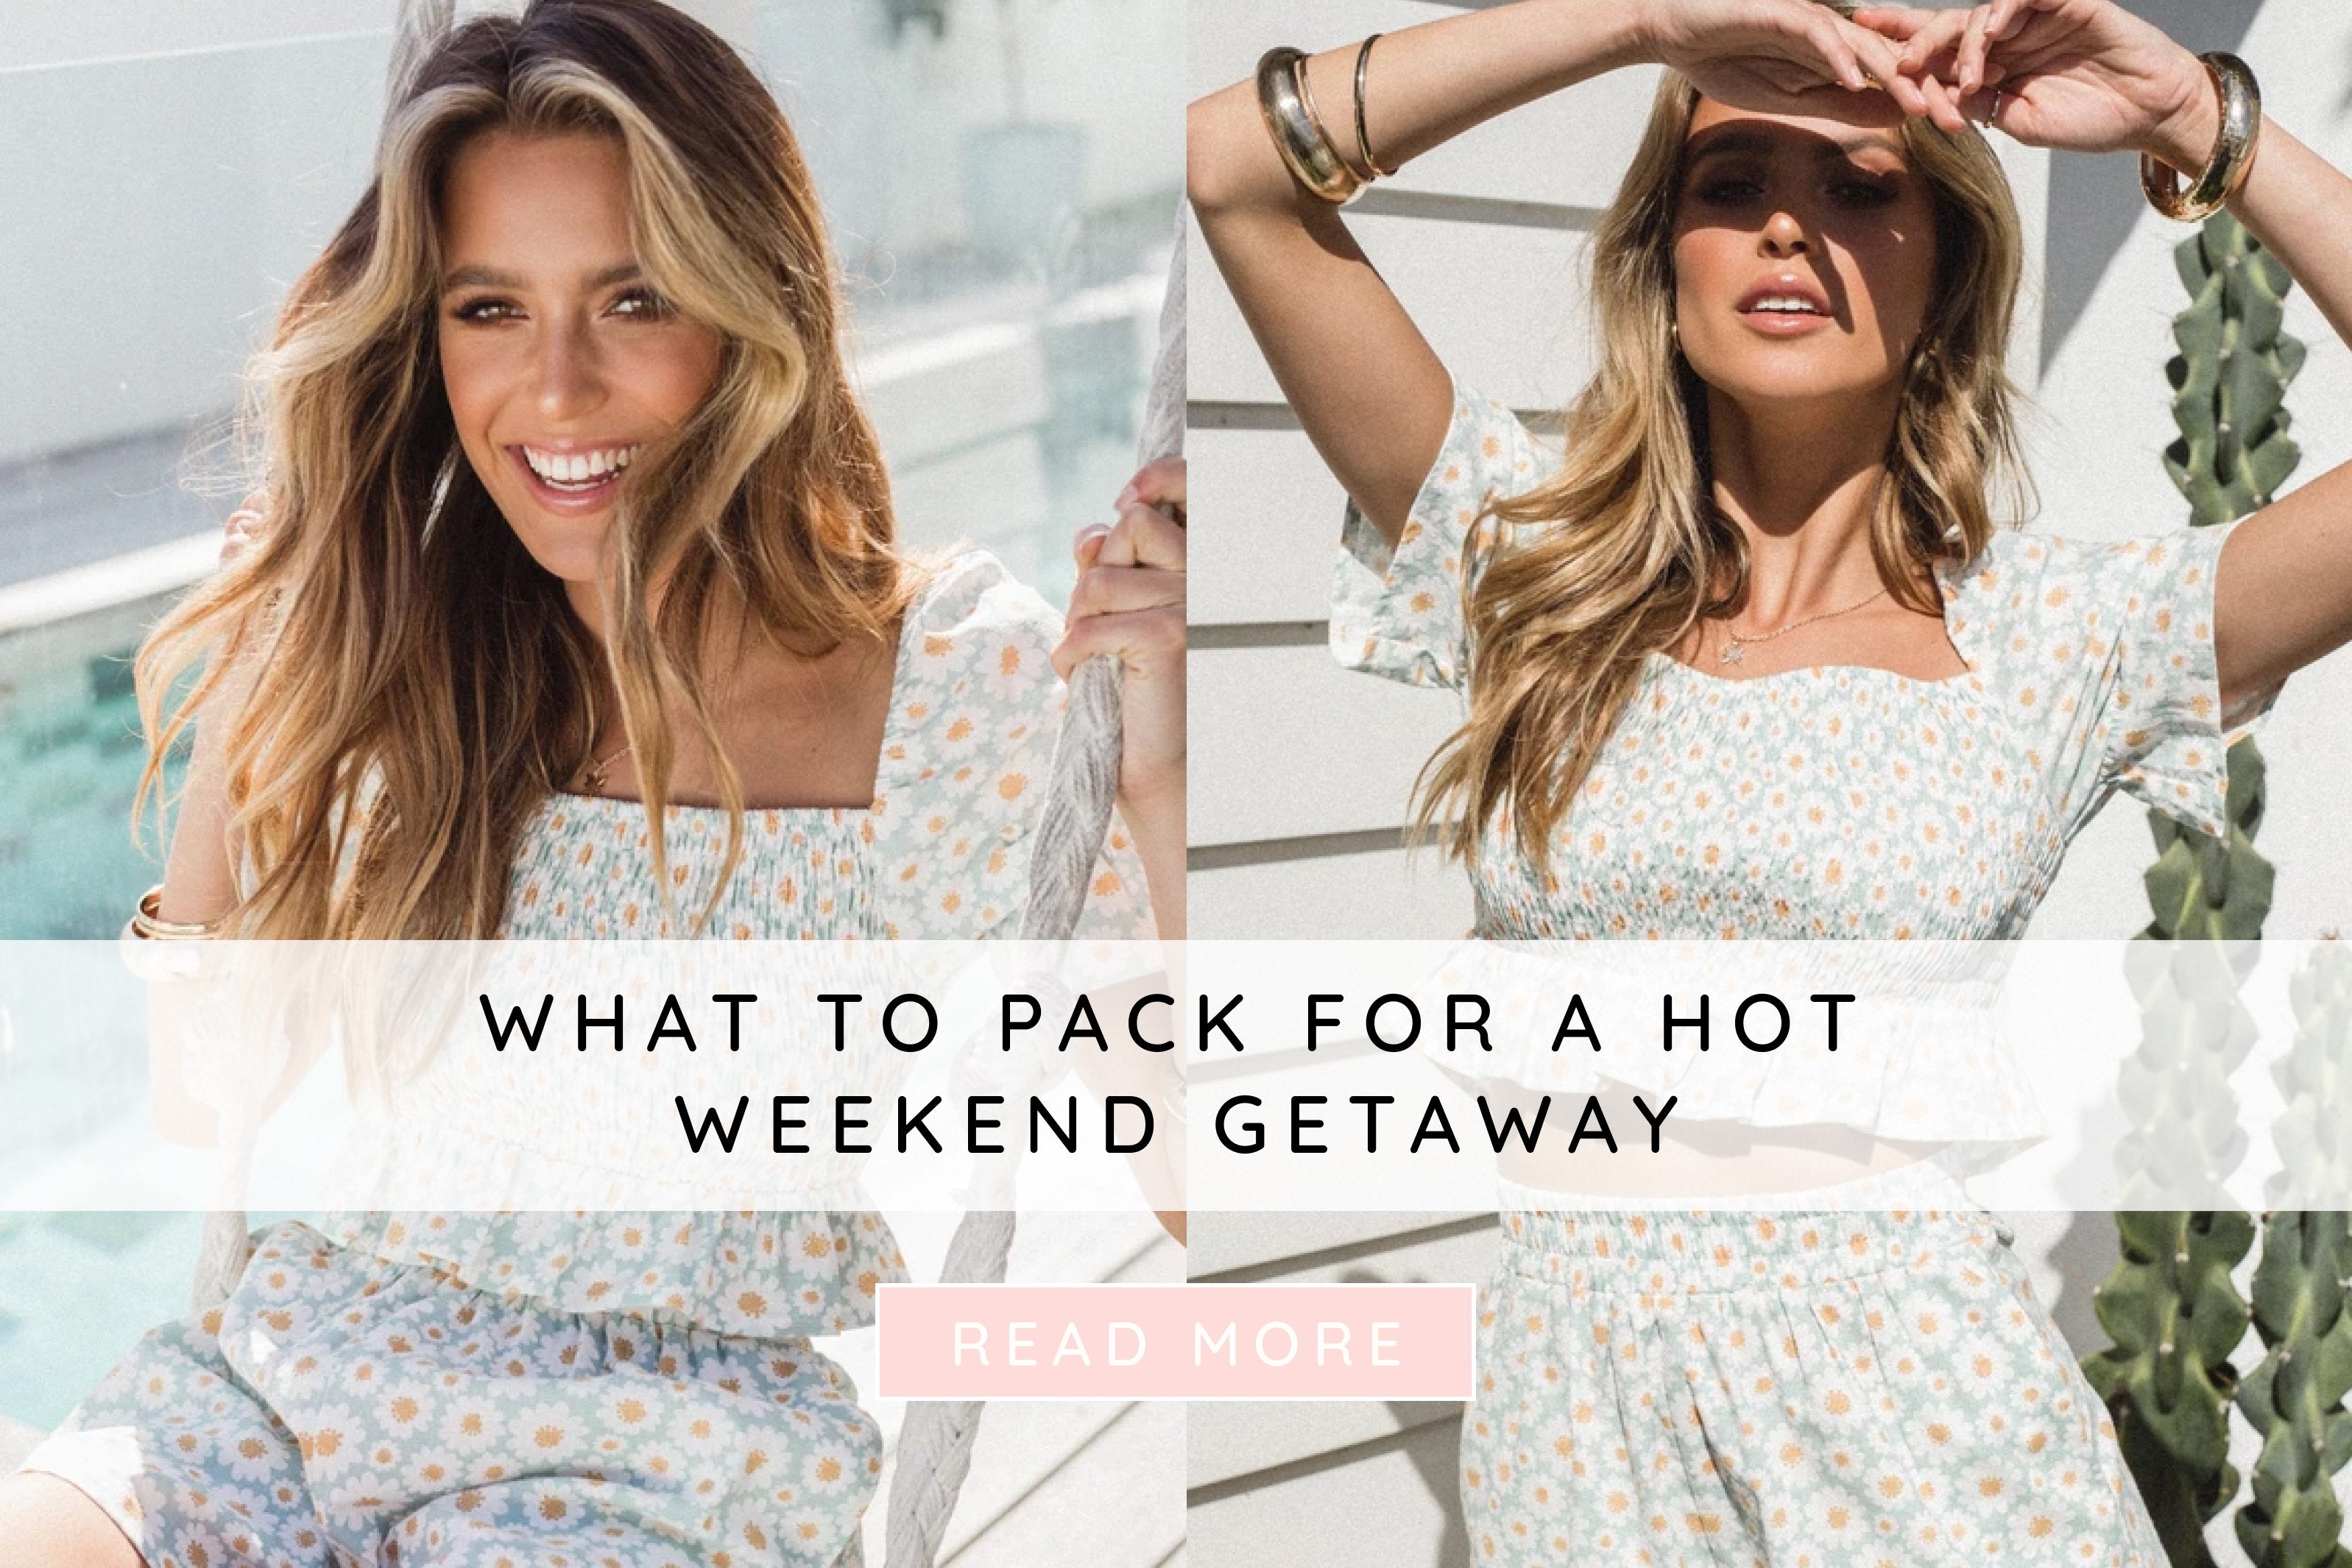 What to pack for a hot weekend getaway